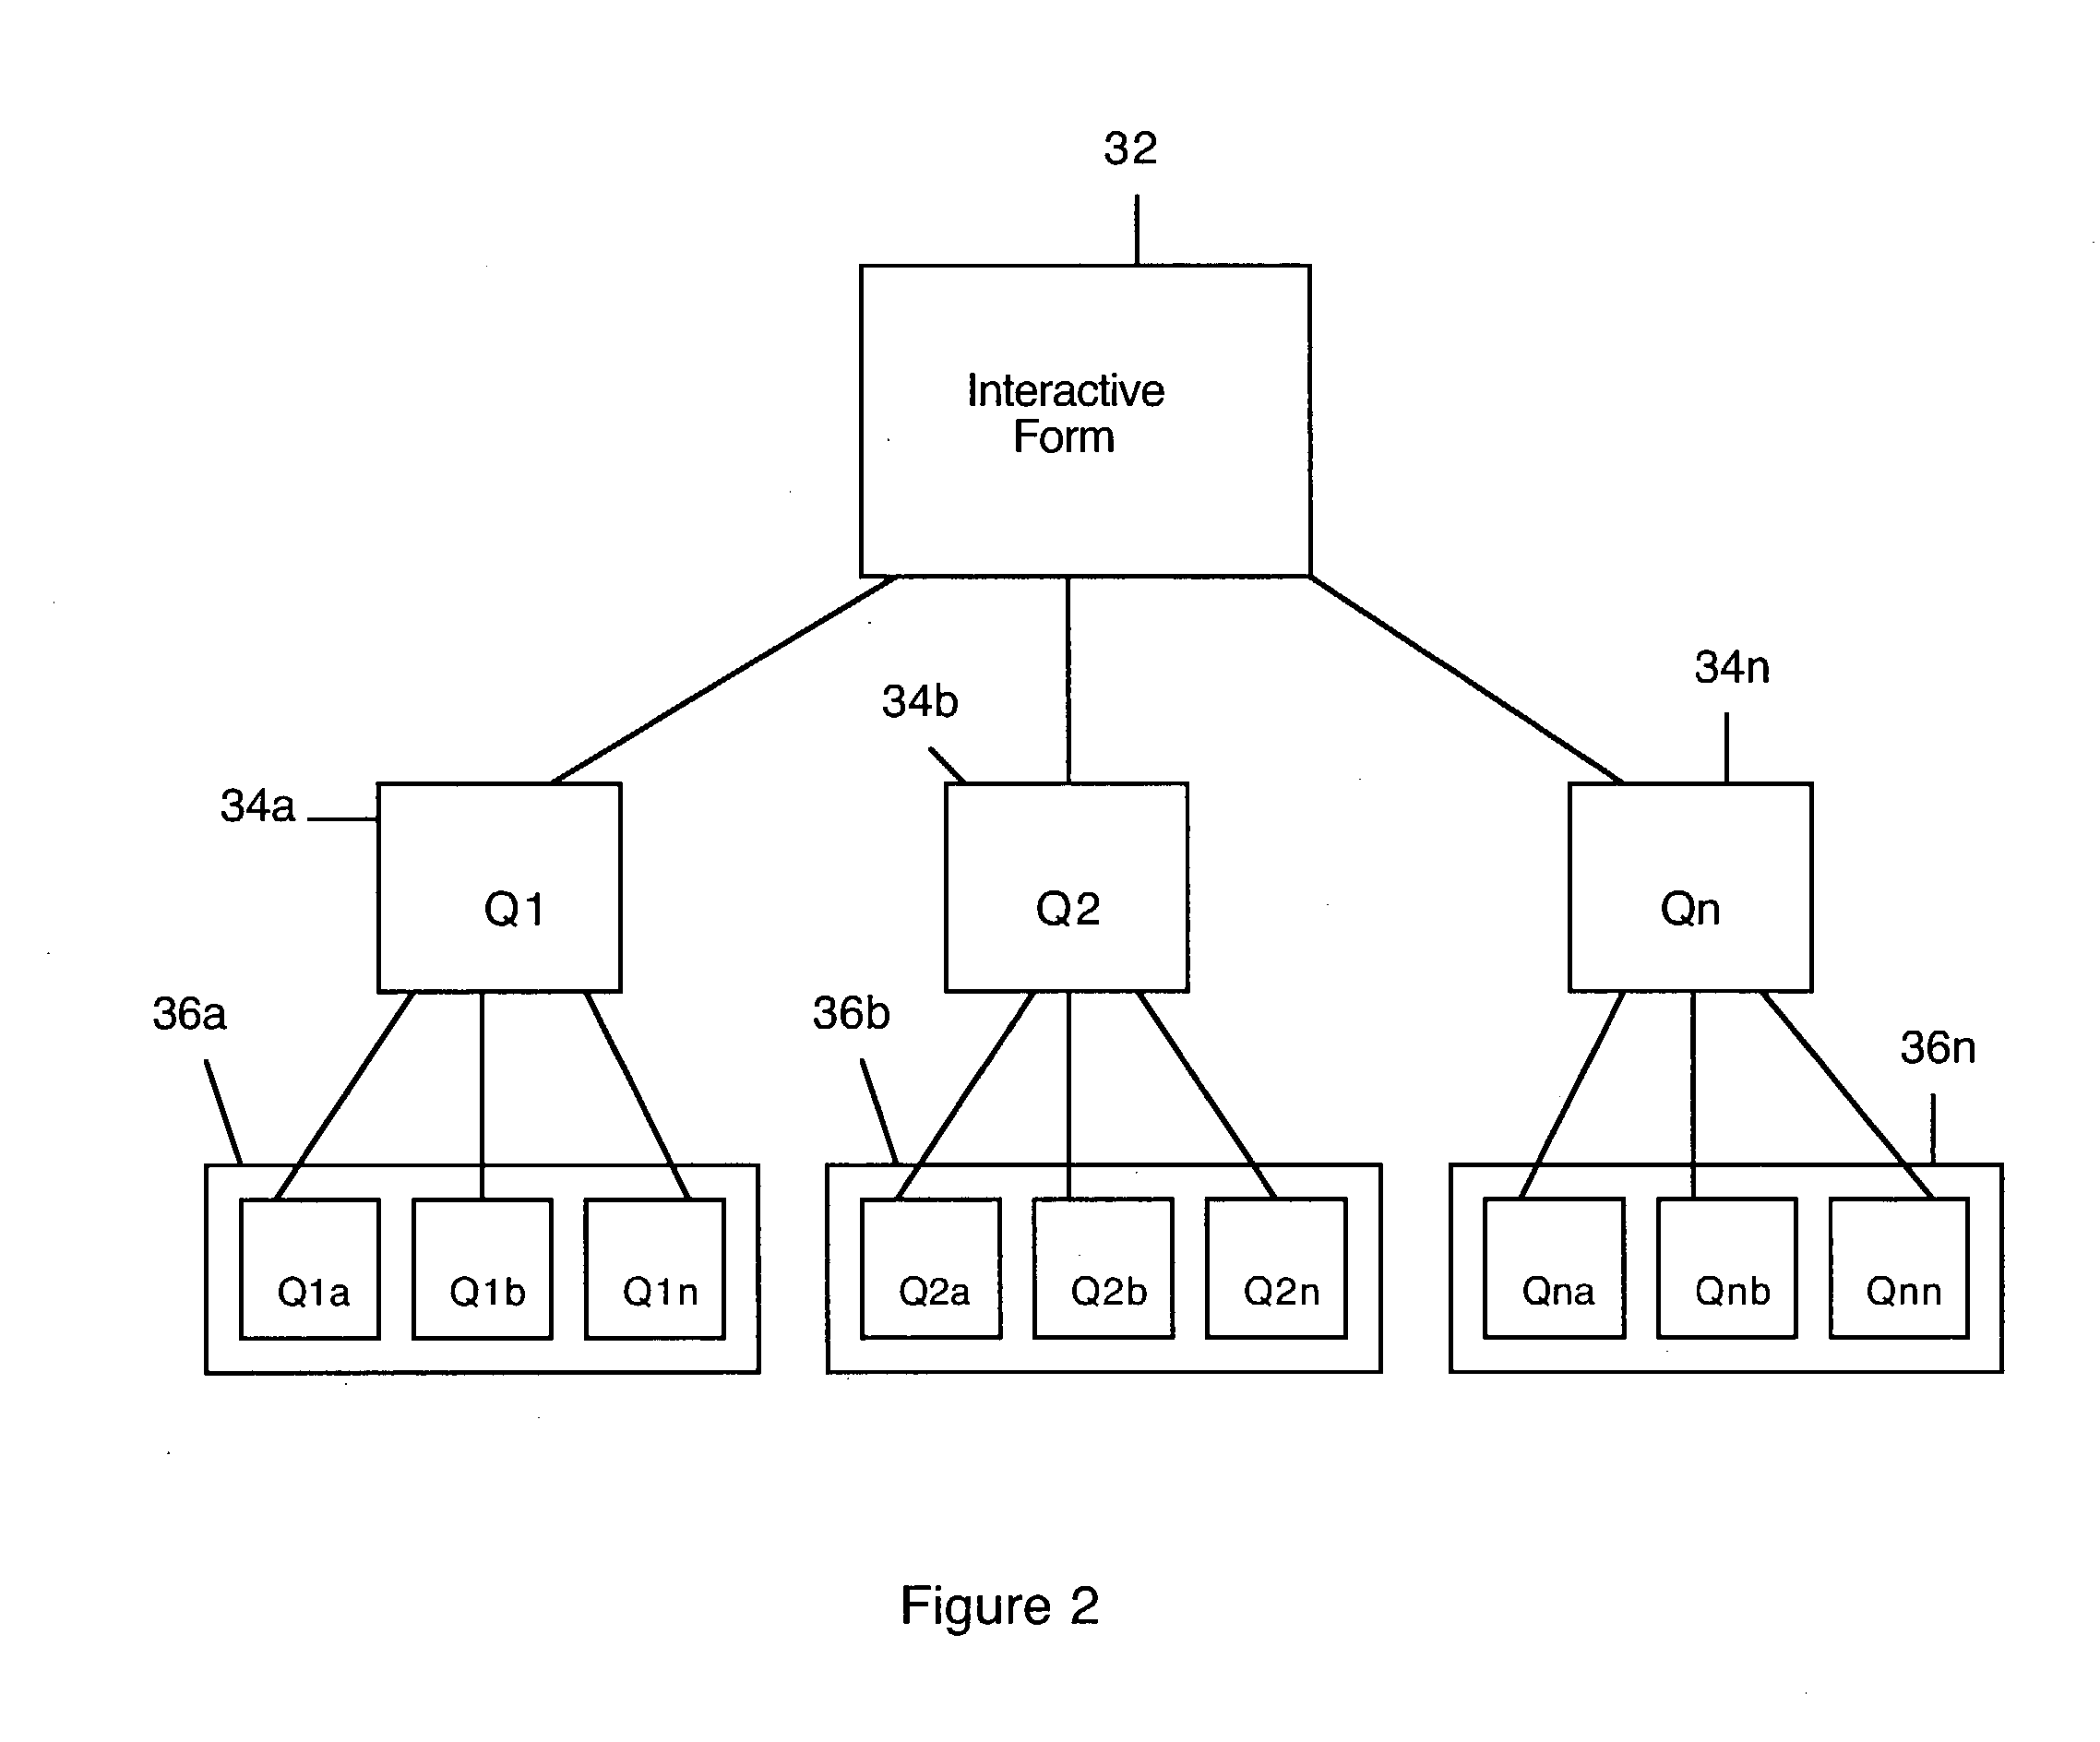 System and method for presenting computerized interactive forms to respondents using a client-server-systems technology based on web standards